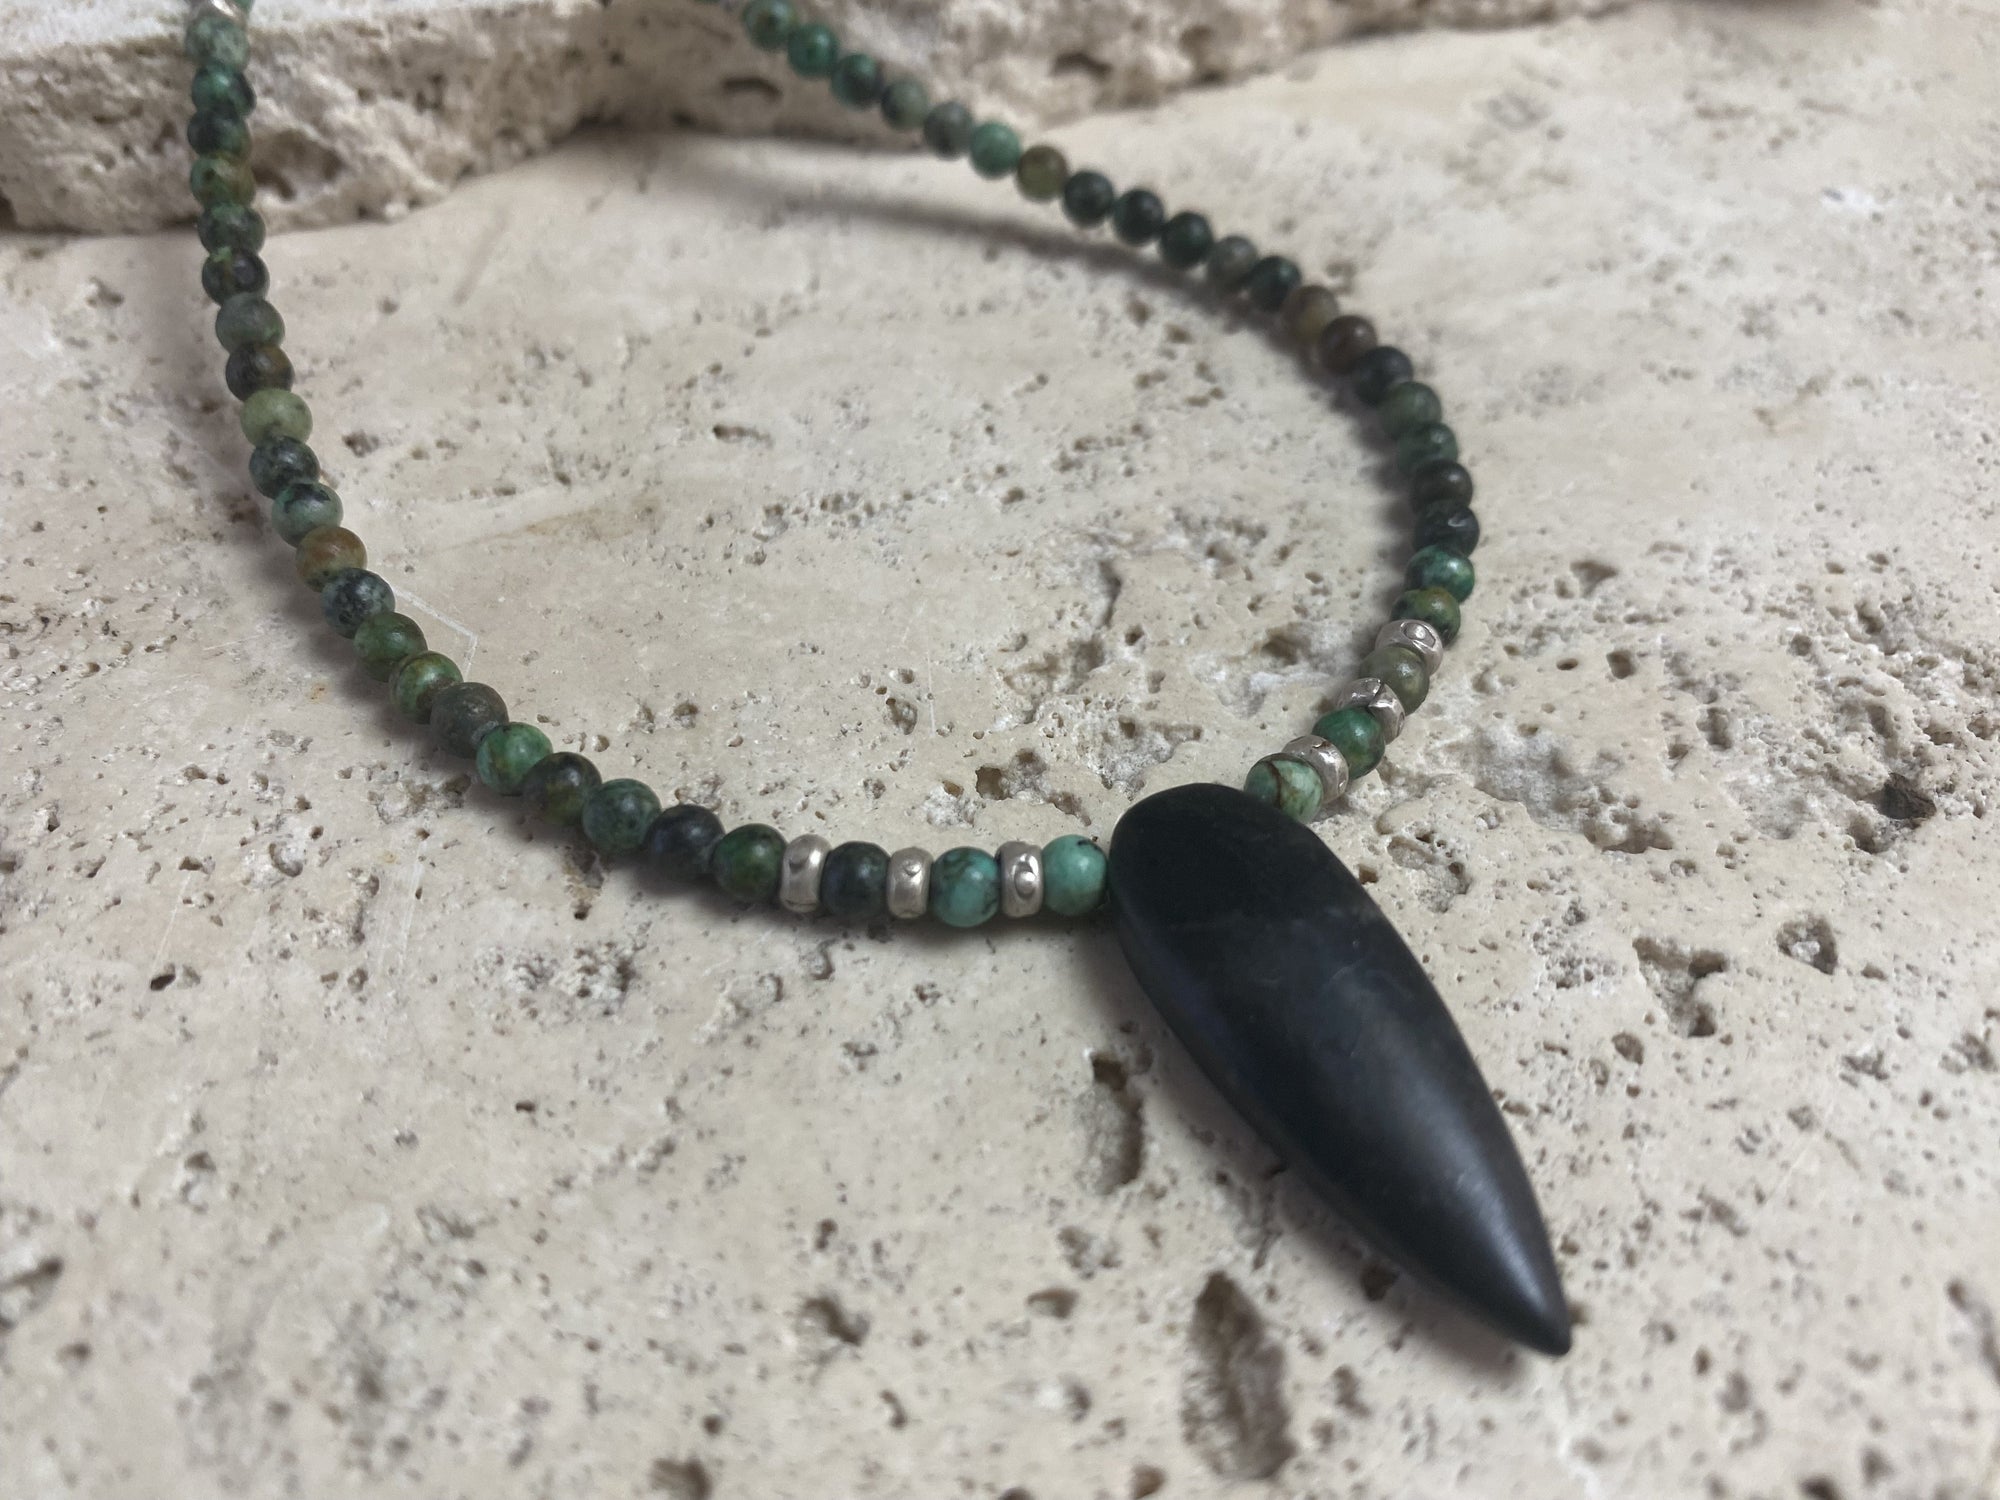 Fine unisex necklace of round natural stone beads, highlighted with Karen hill tribe sterling silver "eye beads" and a long pendant of unpolished onyx. The effect is simple and stunning. Finished with sterling silver findings and hook clasp. Length 42 cm